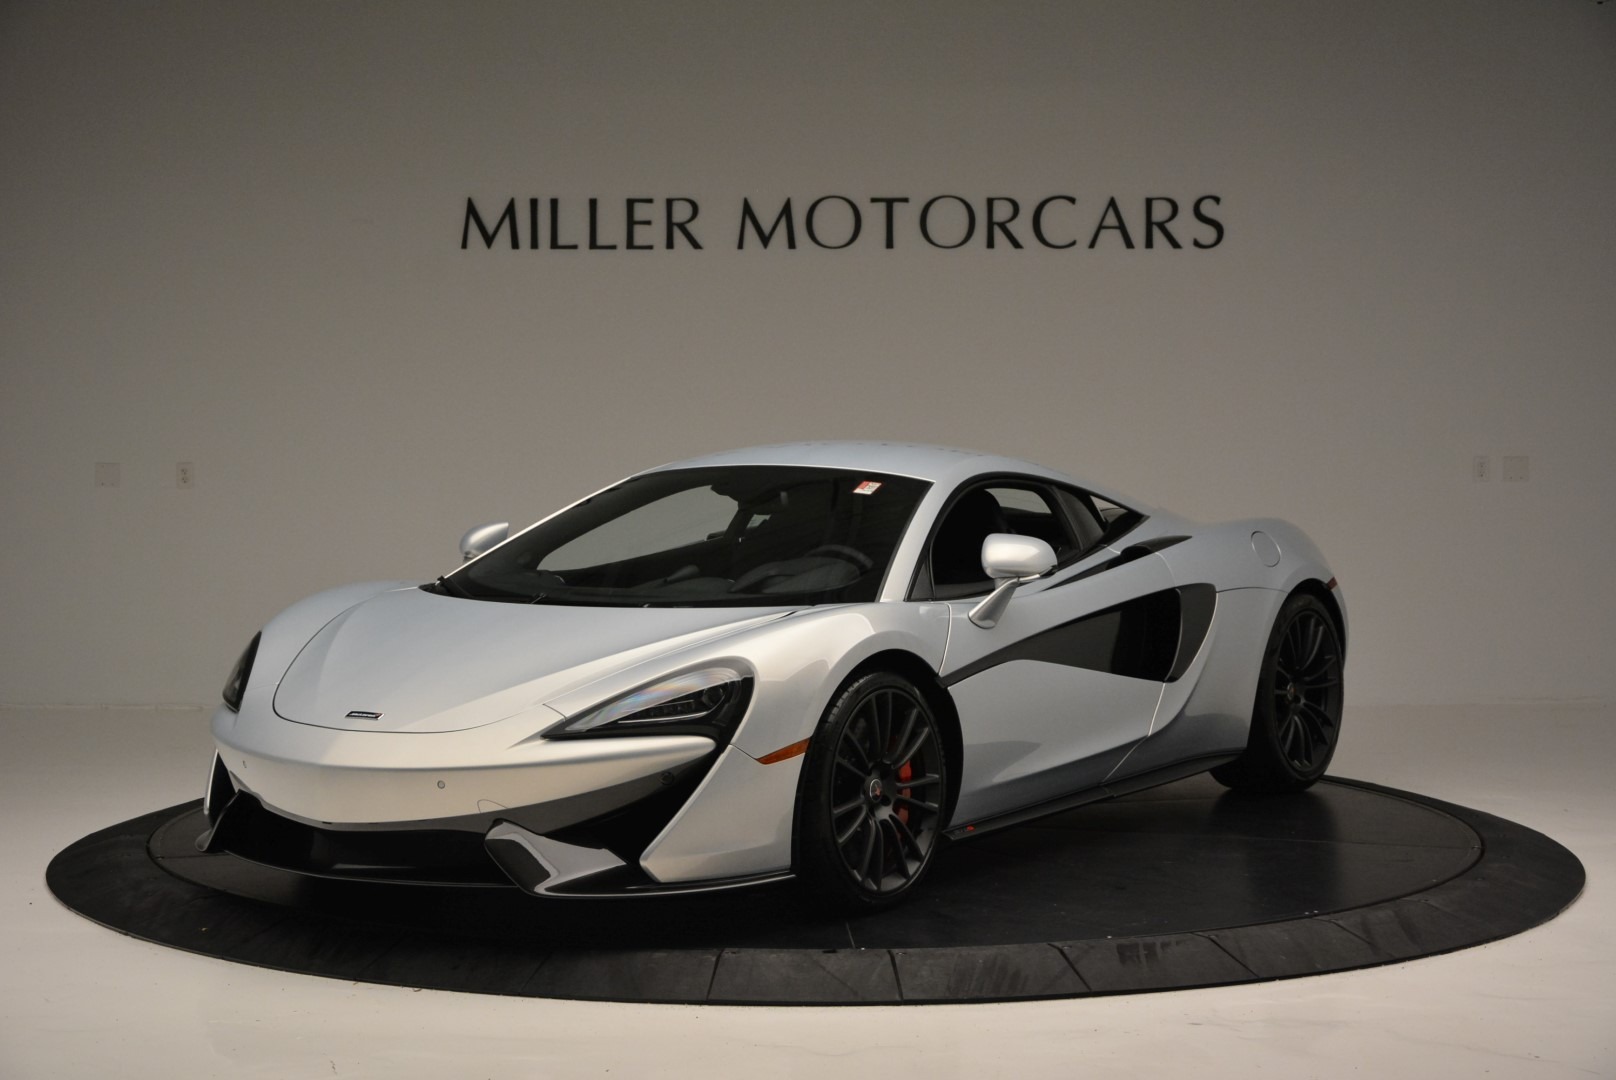 Used 2017 McLaren 570S for sale Sold at Bentley Greenwich in Greenwich CT 06830 1